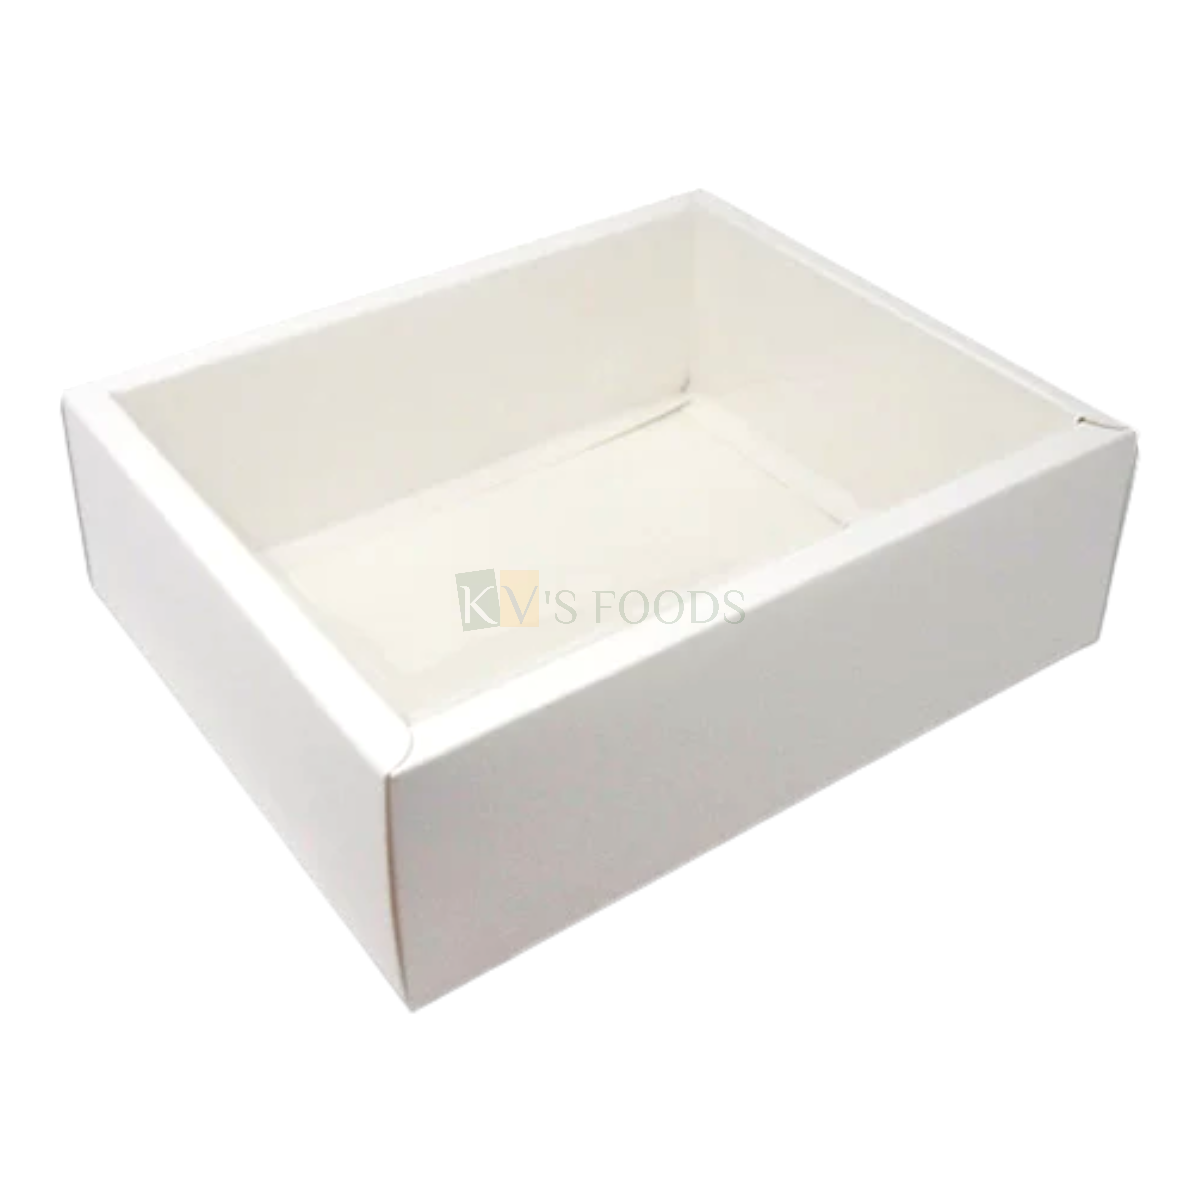 1 PC White Colour Multipurpose Chocolate Hamper Box with Transparent Window Box Size 10.2*8.1*3 Inch for Sweets, Dryfruits, Candies, Truffles, Doughnuts, Jars Upto 250 ML, Return Gifts Pacakging